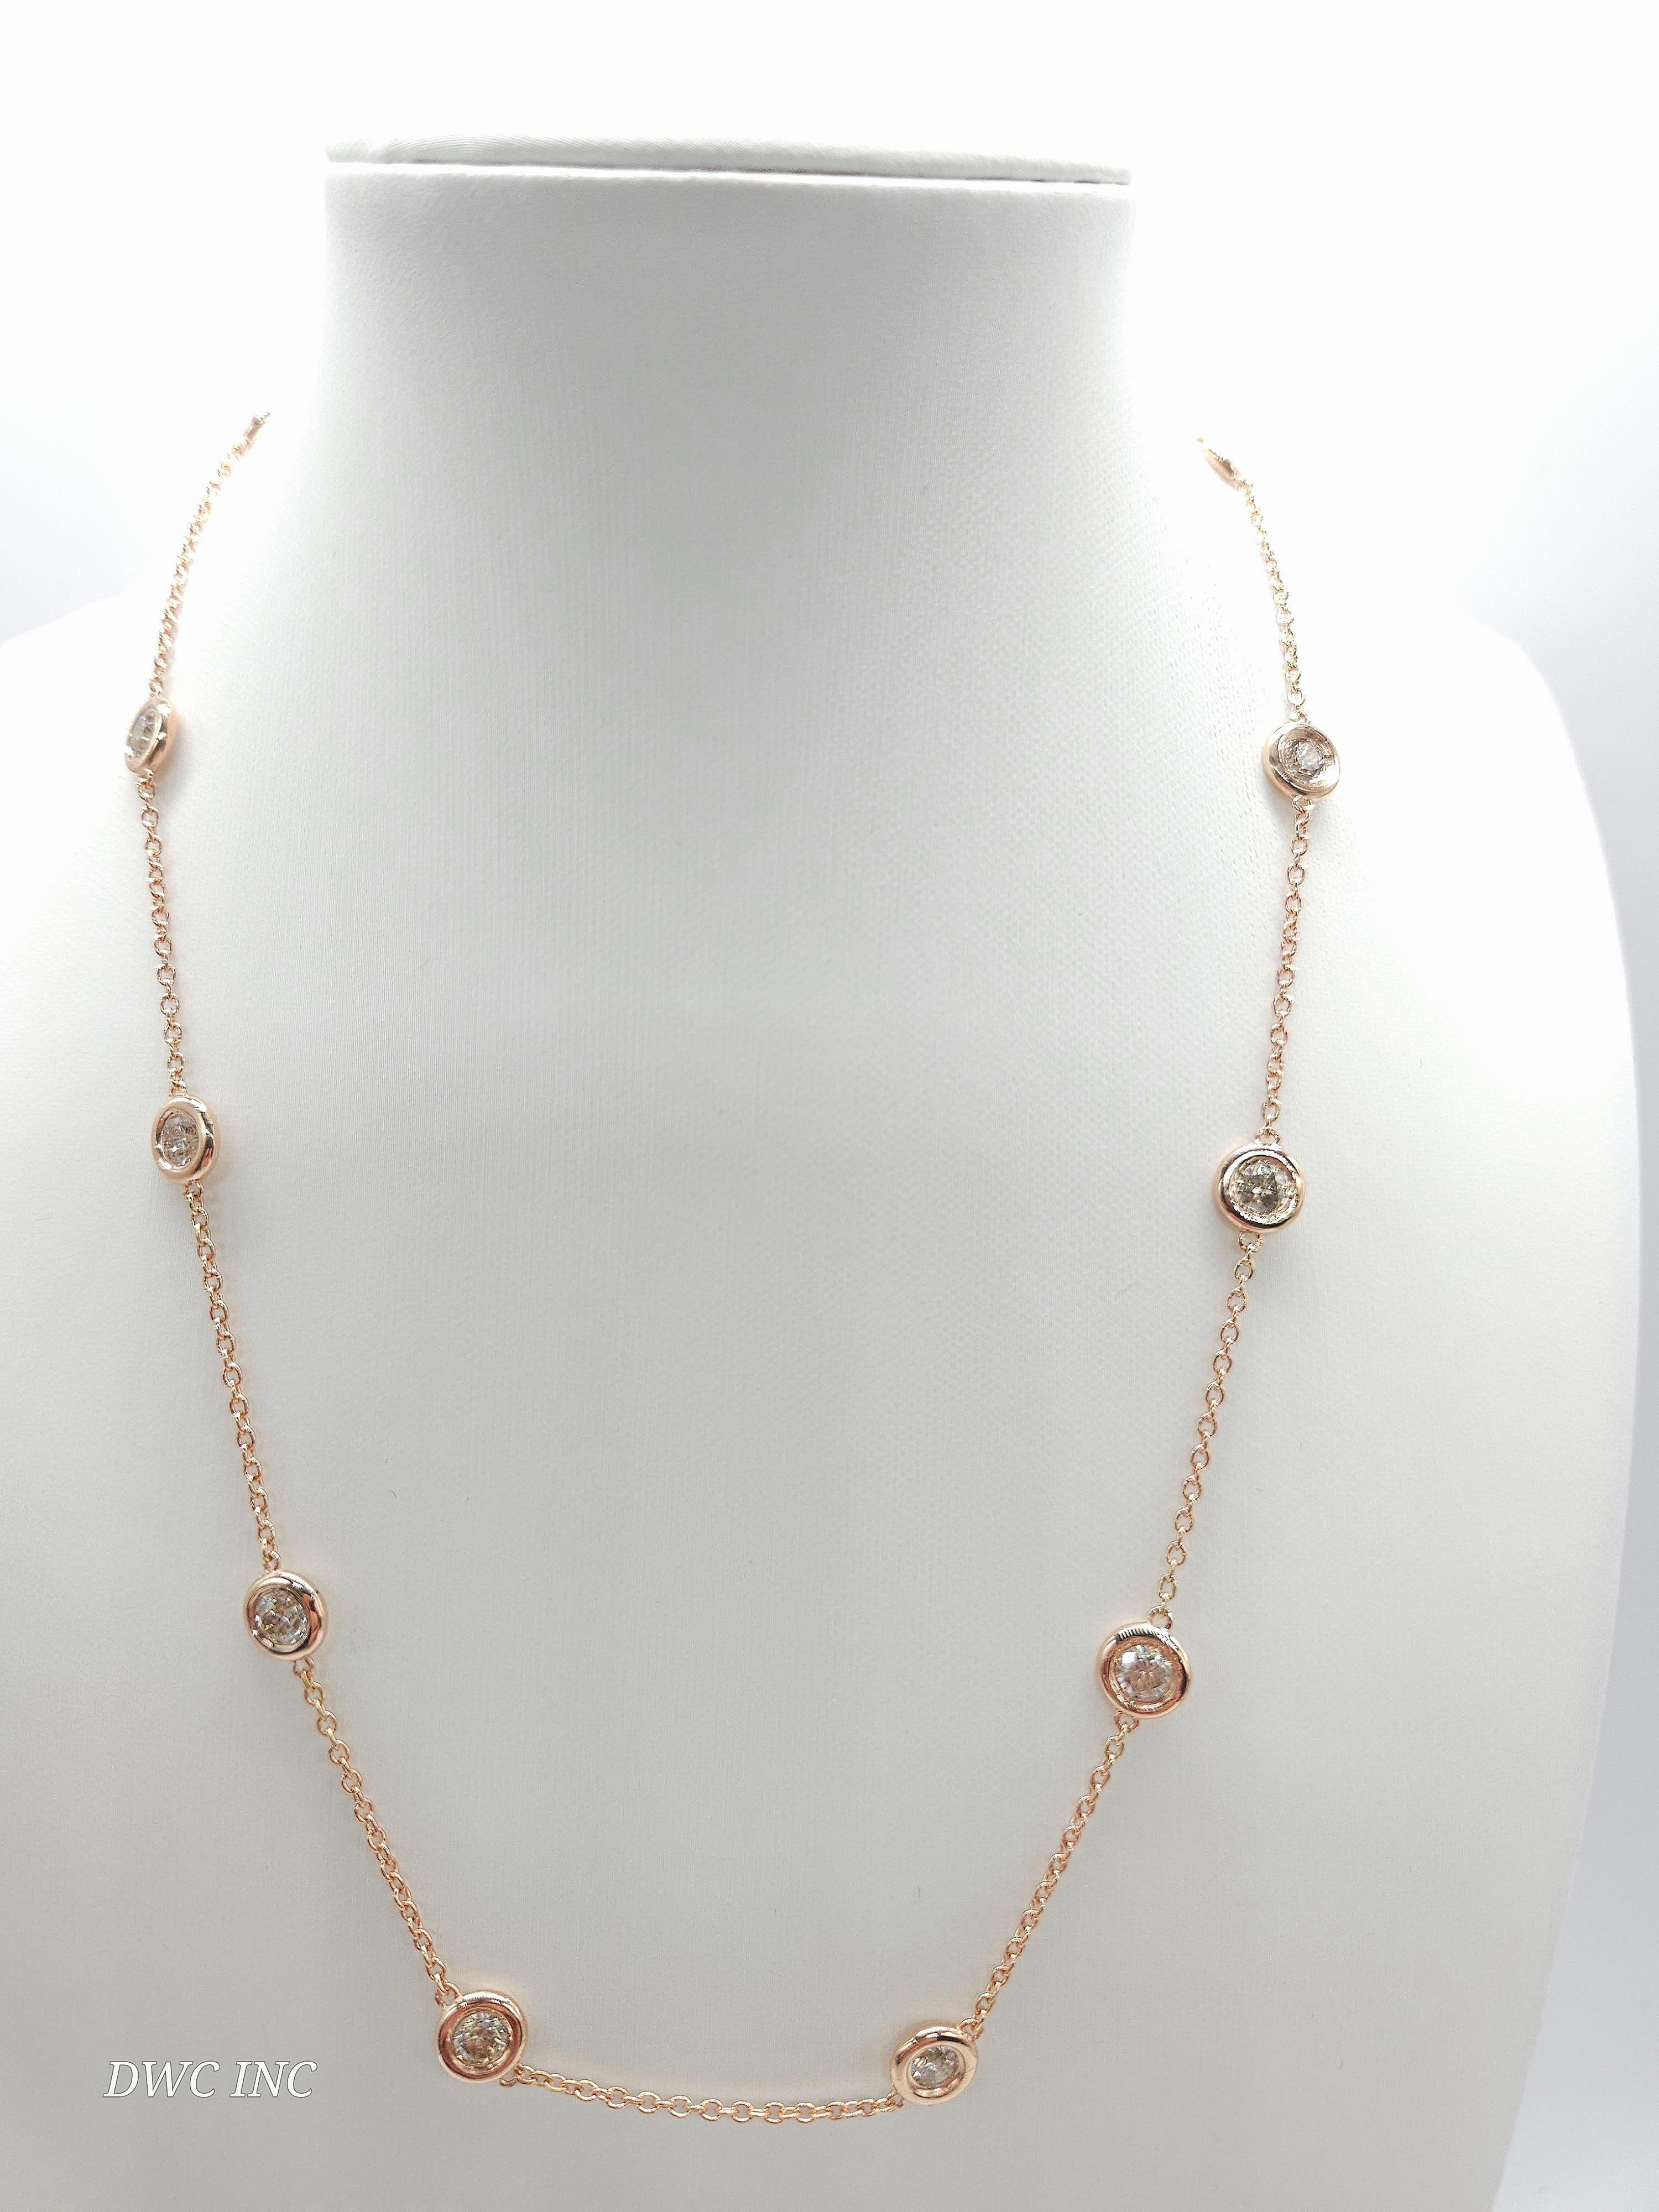 10 Station Diamond by the yard necklace set in Italian made 14K rose gold. 
Total weight is 2.70 carats. Beautiful shiny stones. 
Length 16 inch 7.26 grams. Average I-SI,I Natural Diamond

*Free shipping within U.S*